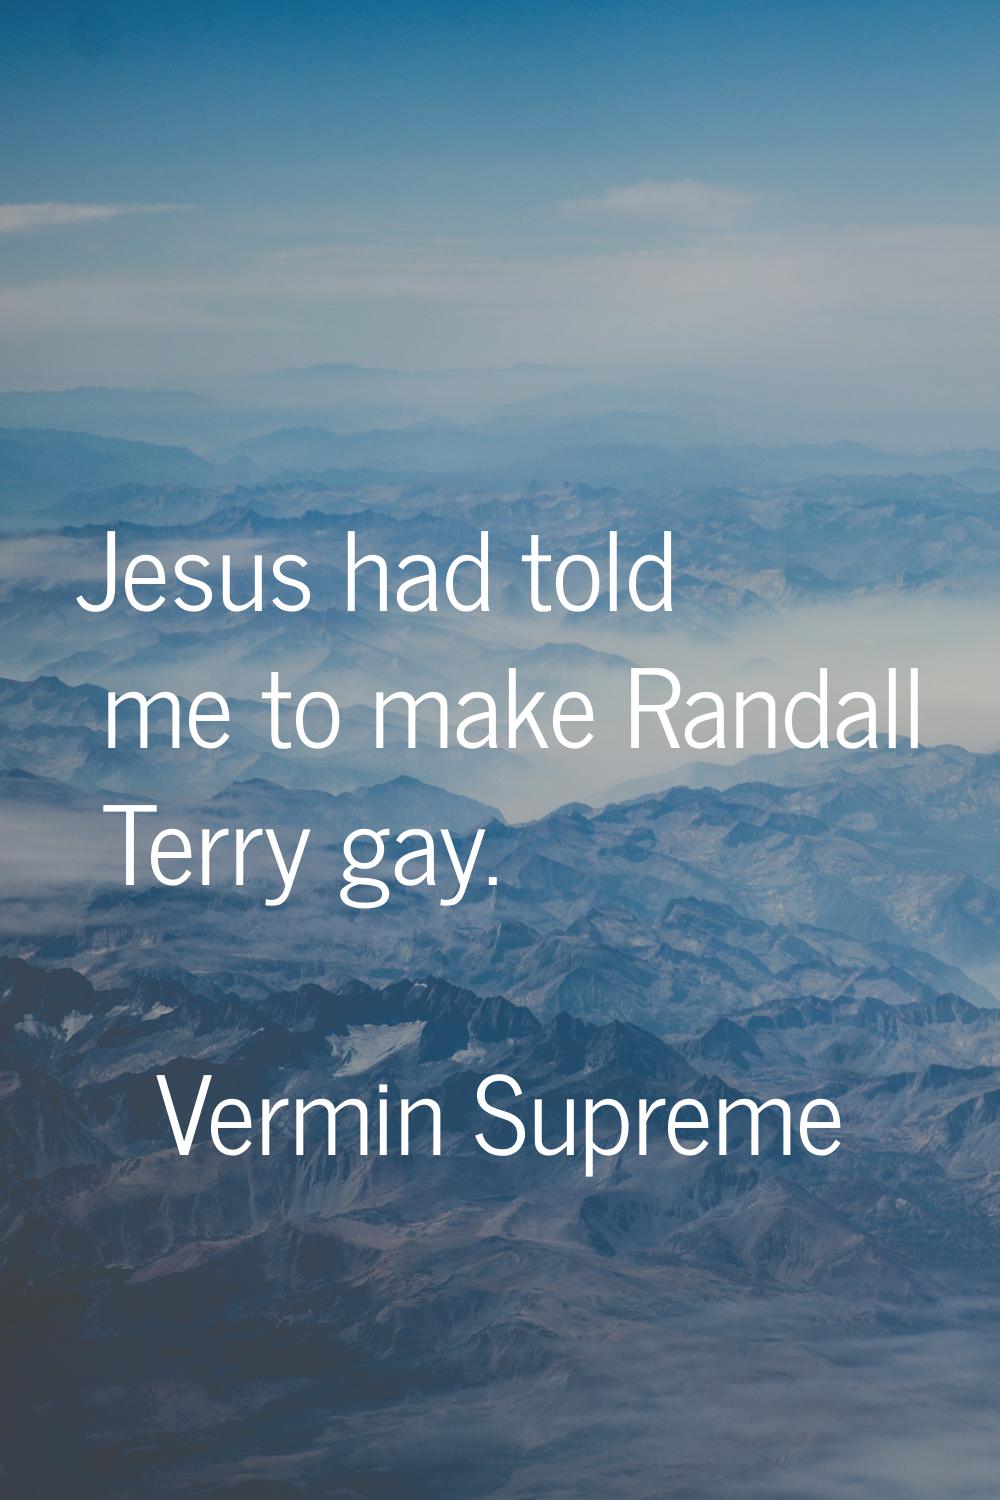 Jesus had told me to make Randall Terry gay.